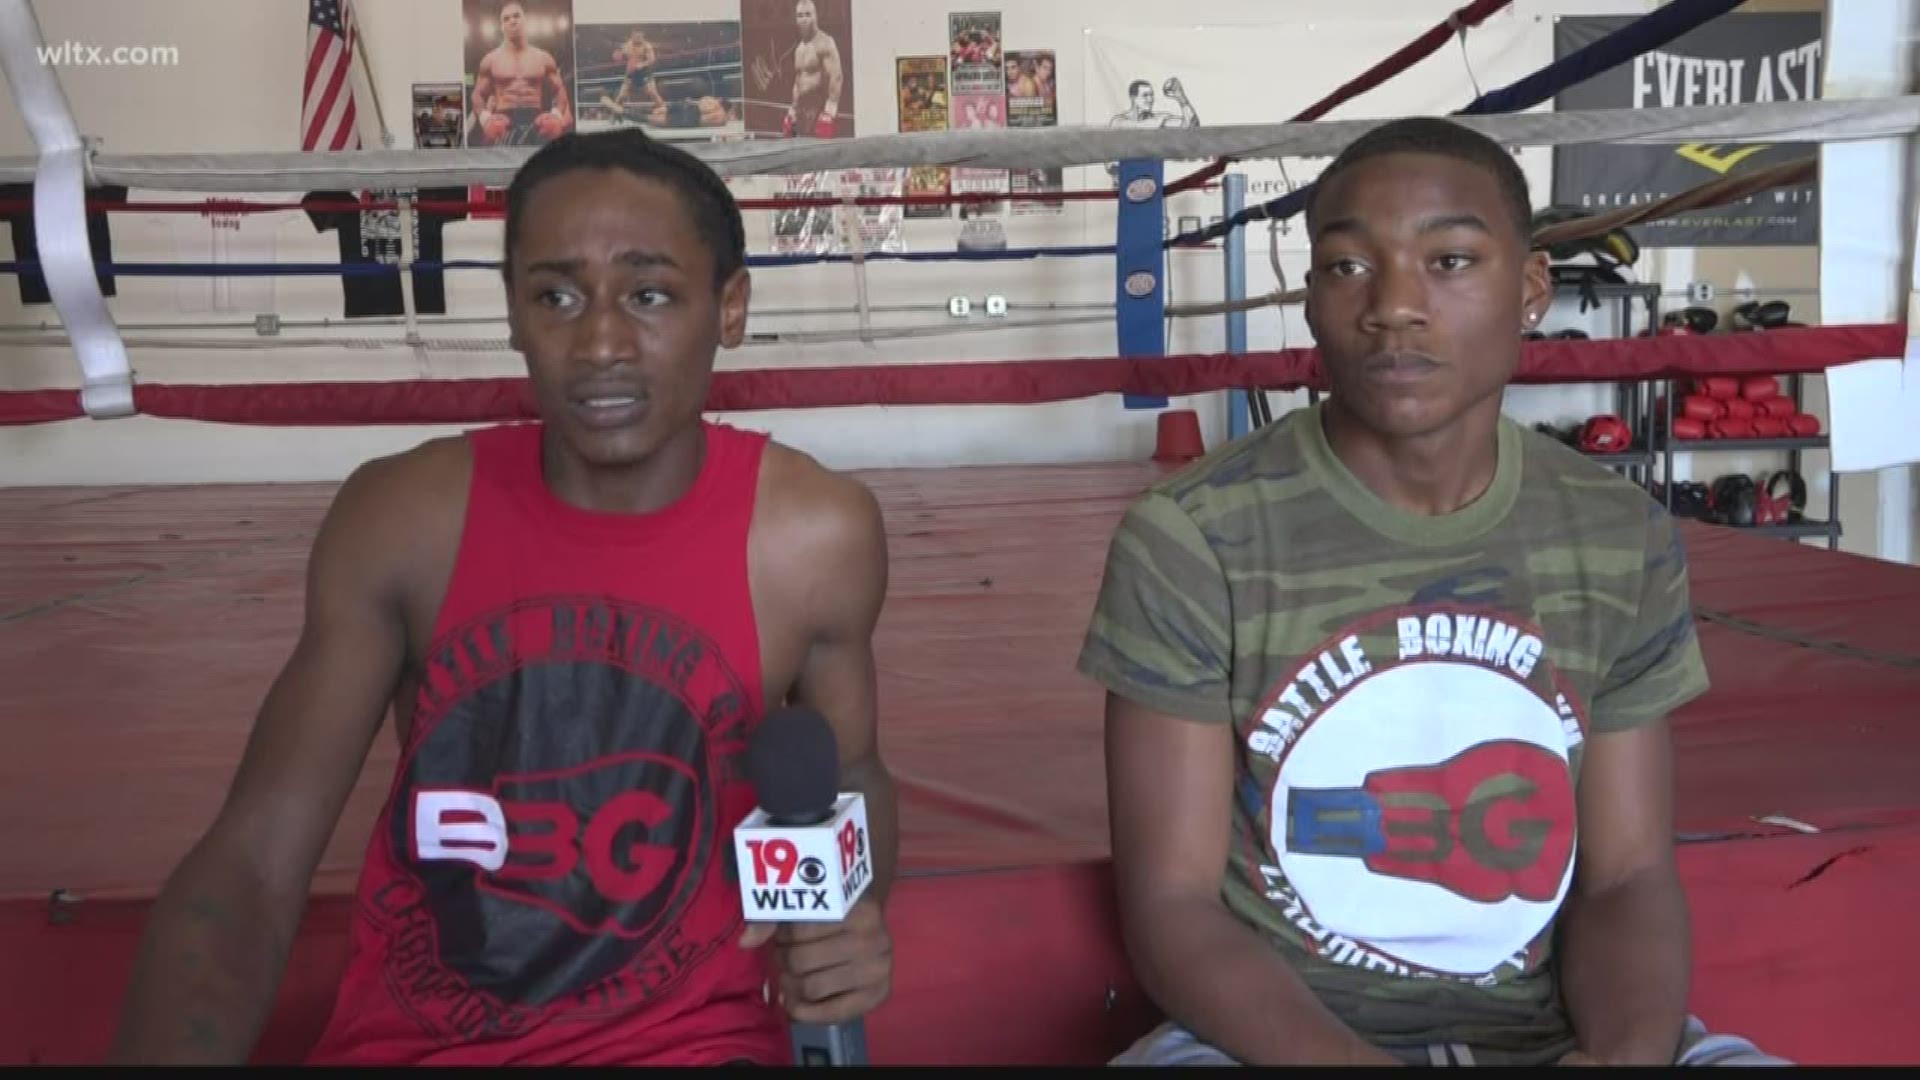 Two SC boxers have signed contracts with a professional boxing company.